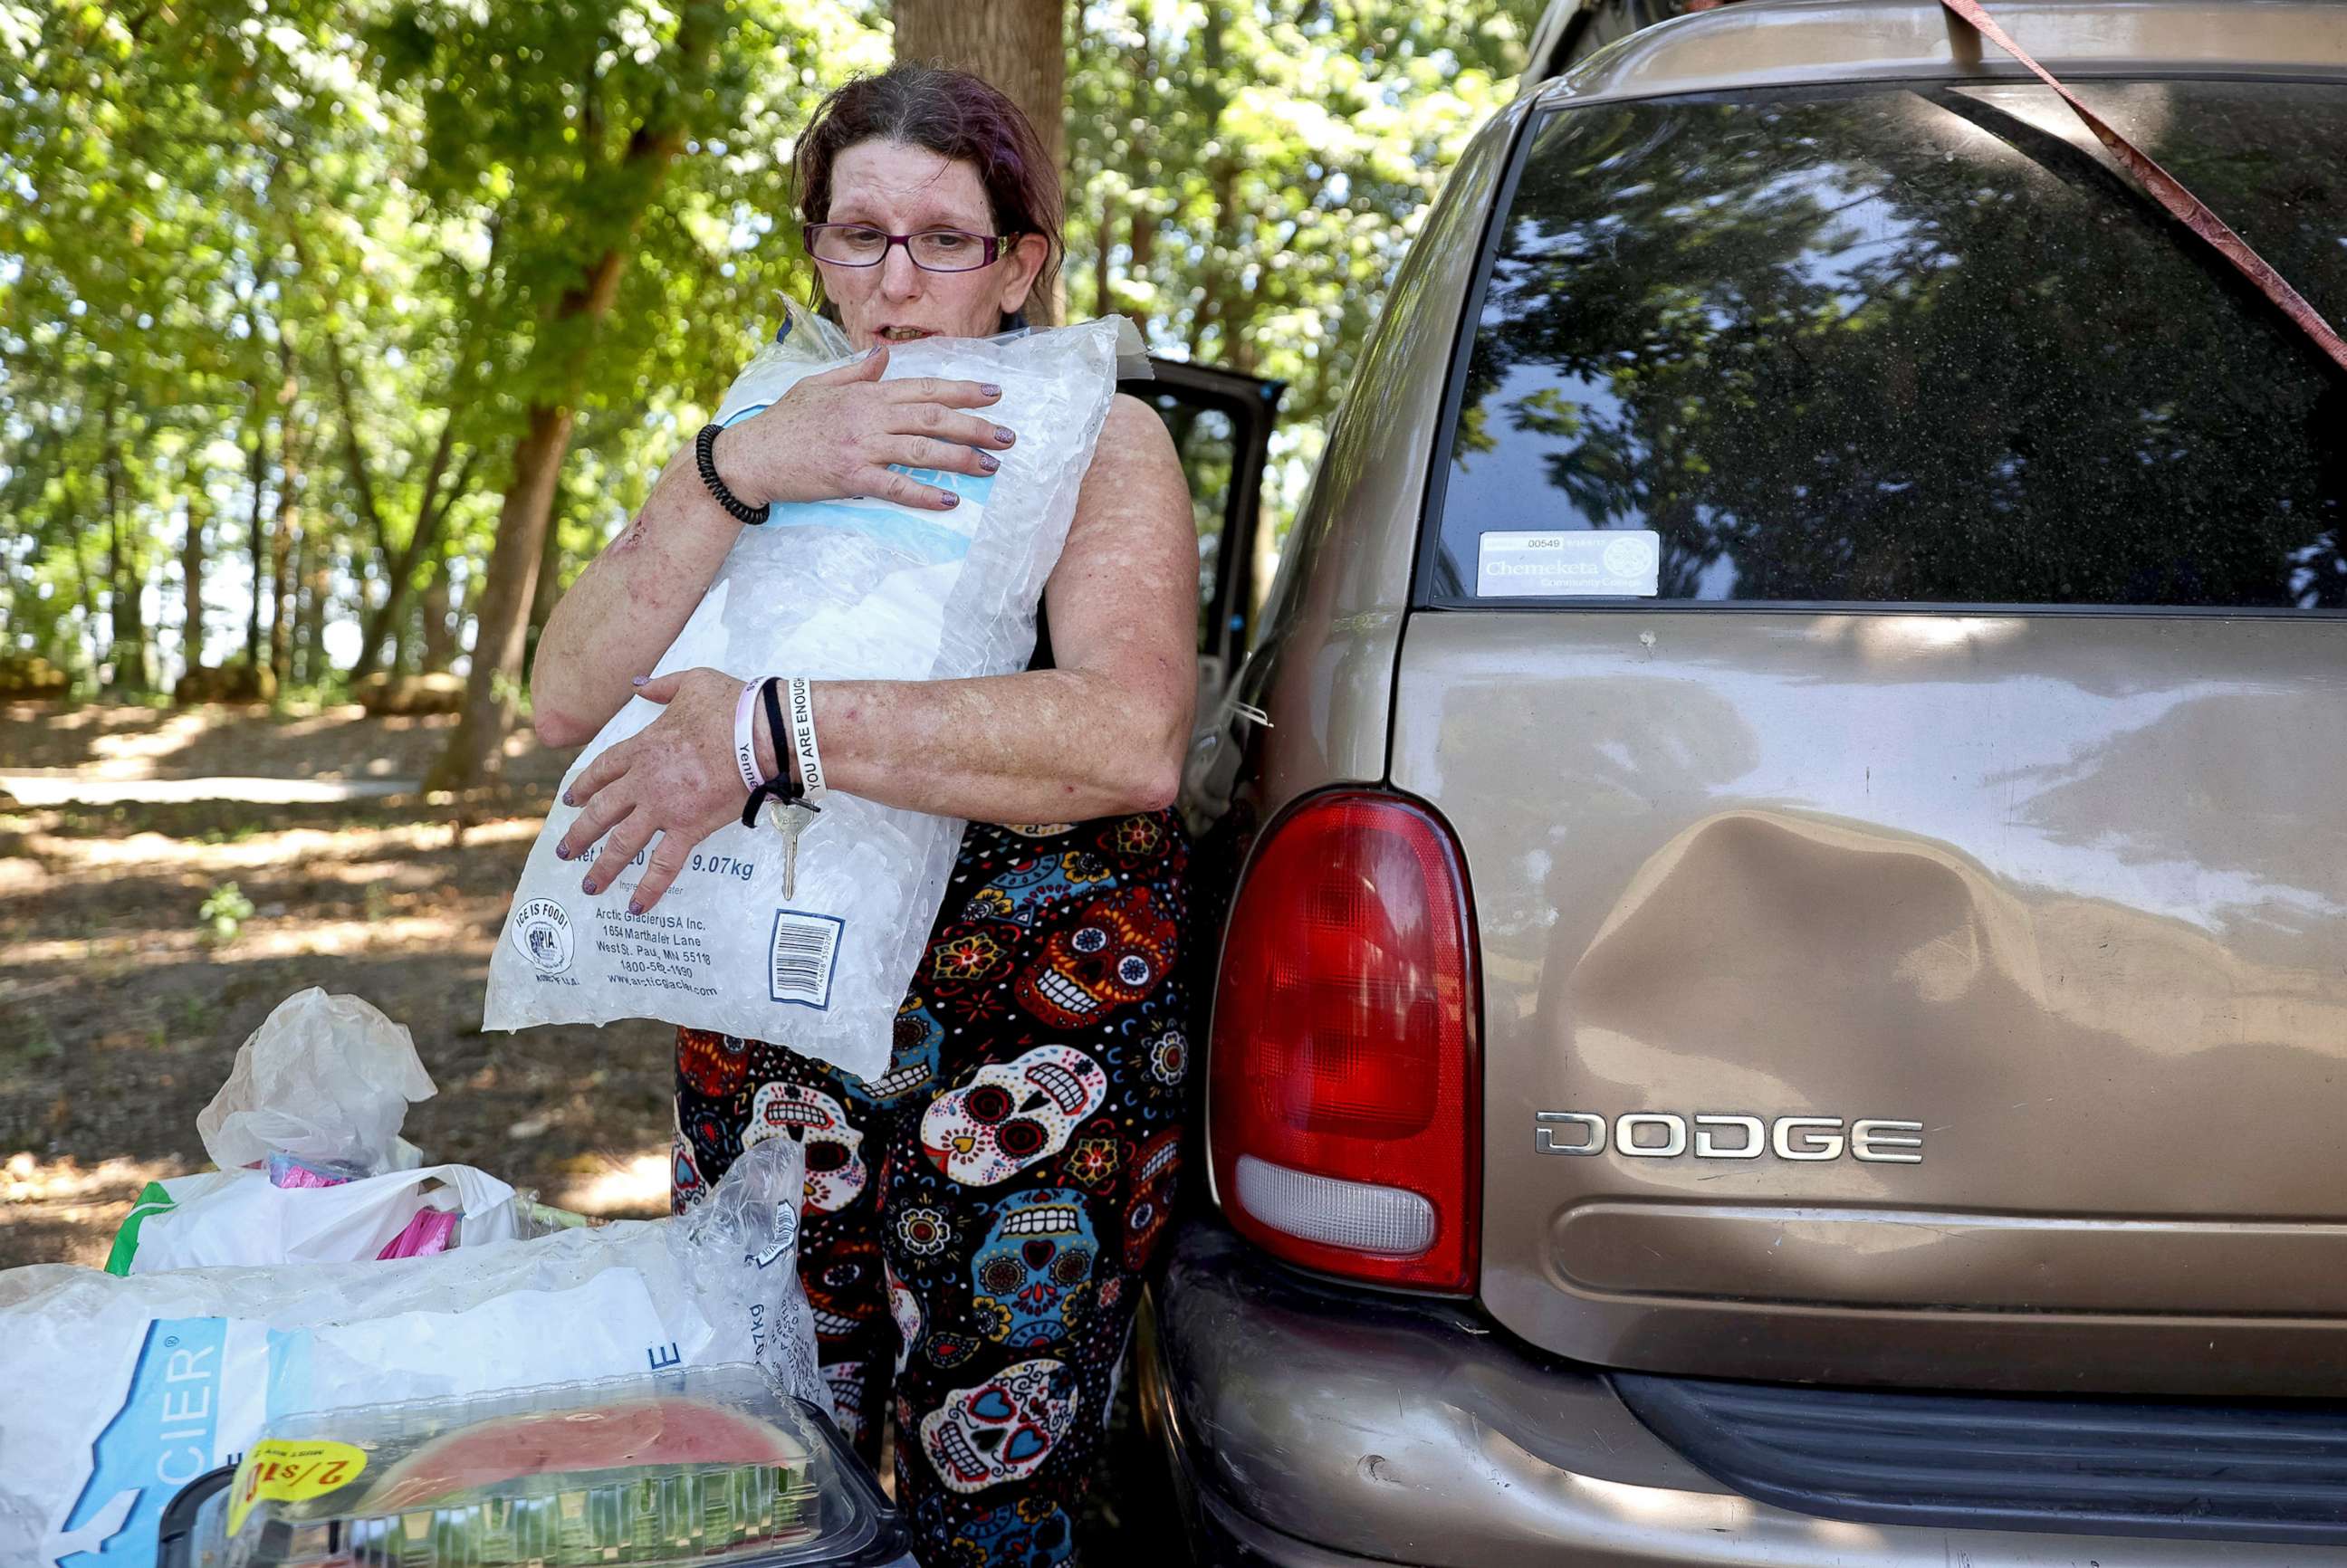 PHOTO: Carleen Bell hugs a bag of ice to cool off while unloading groceries at Wallace Marine Park in Salem, Ore., June 26, 2021.